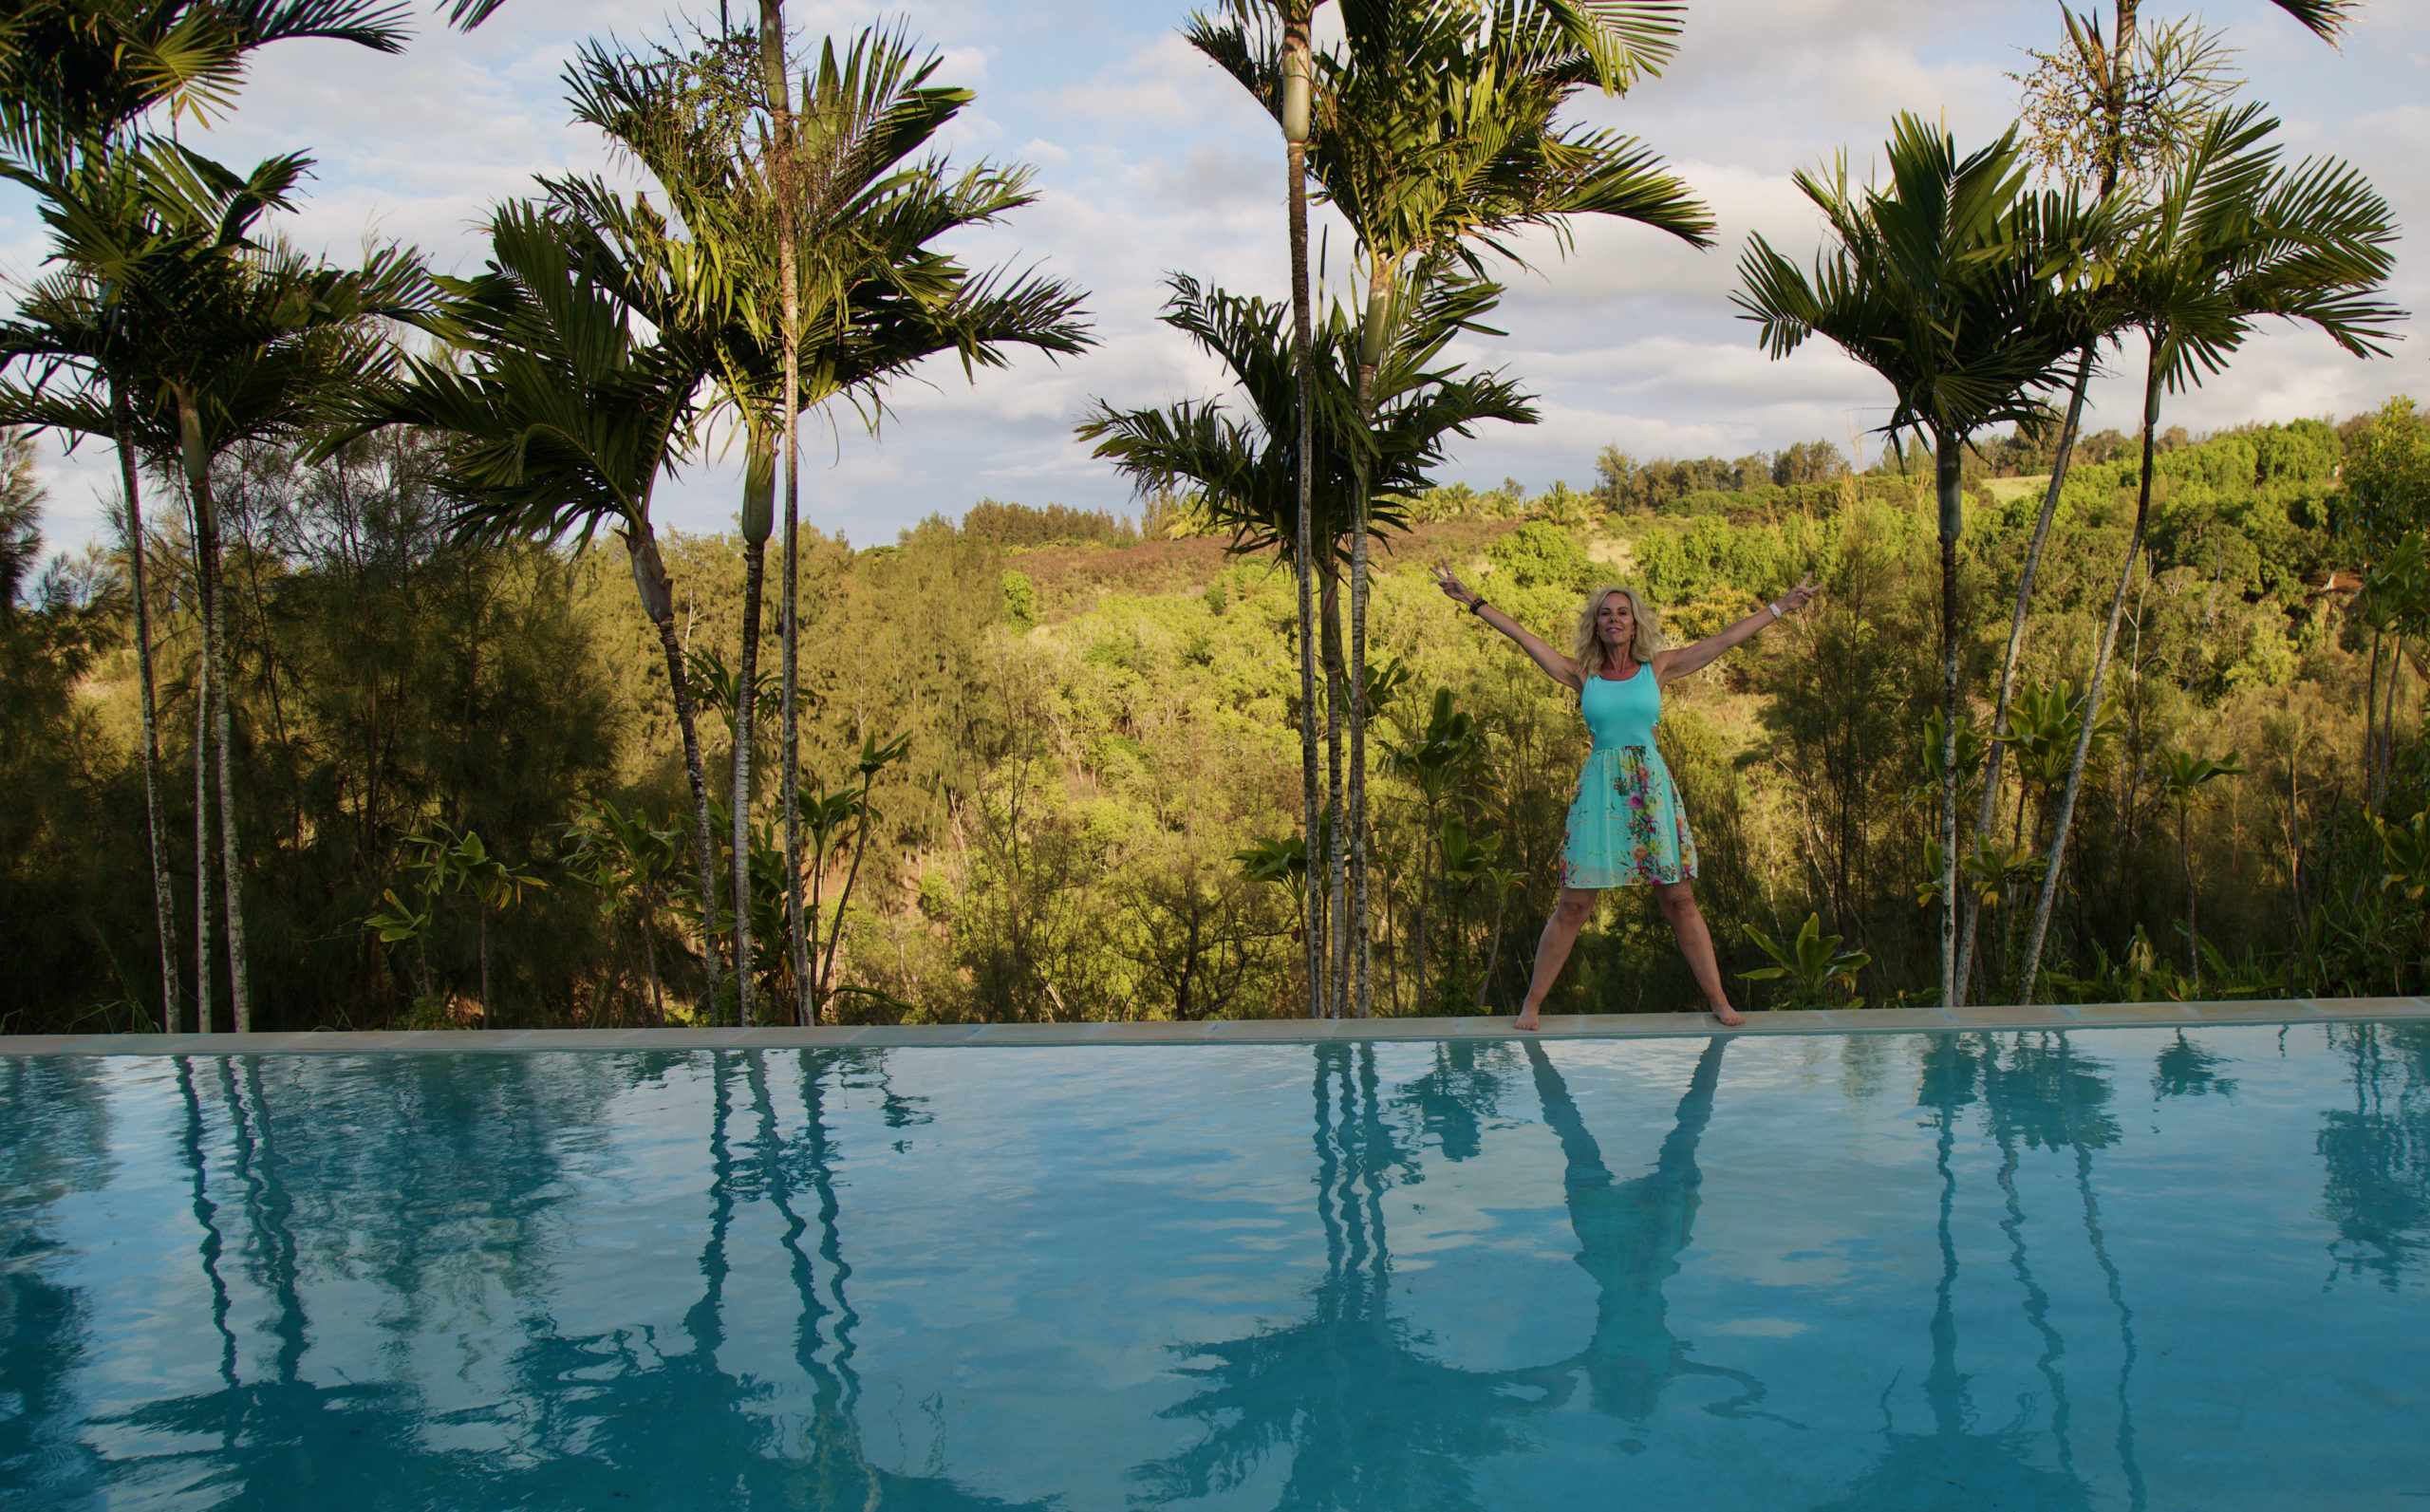 Yoga Student in Star Pose by the Pool in Costa Rica